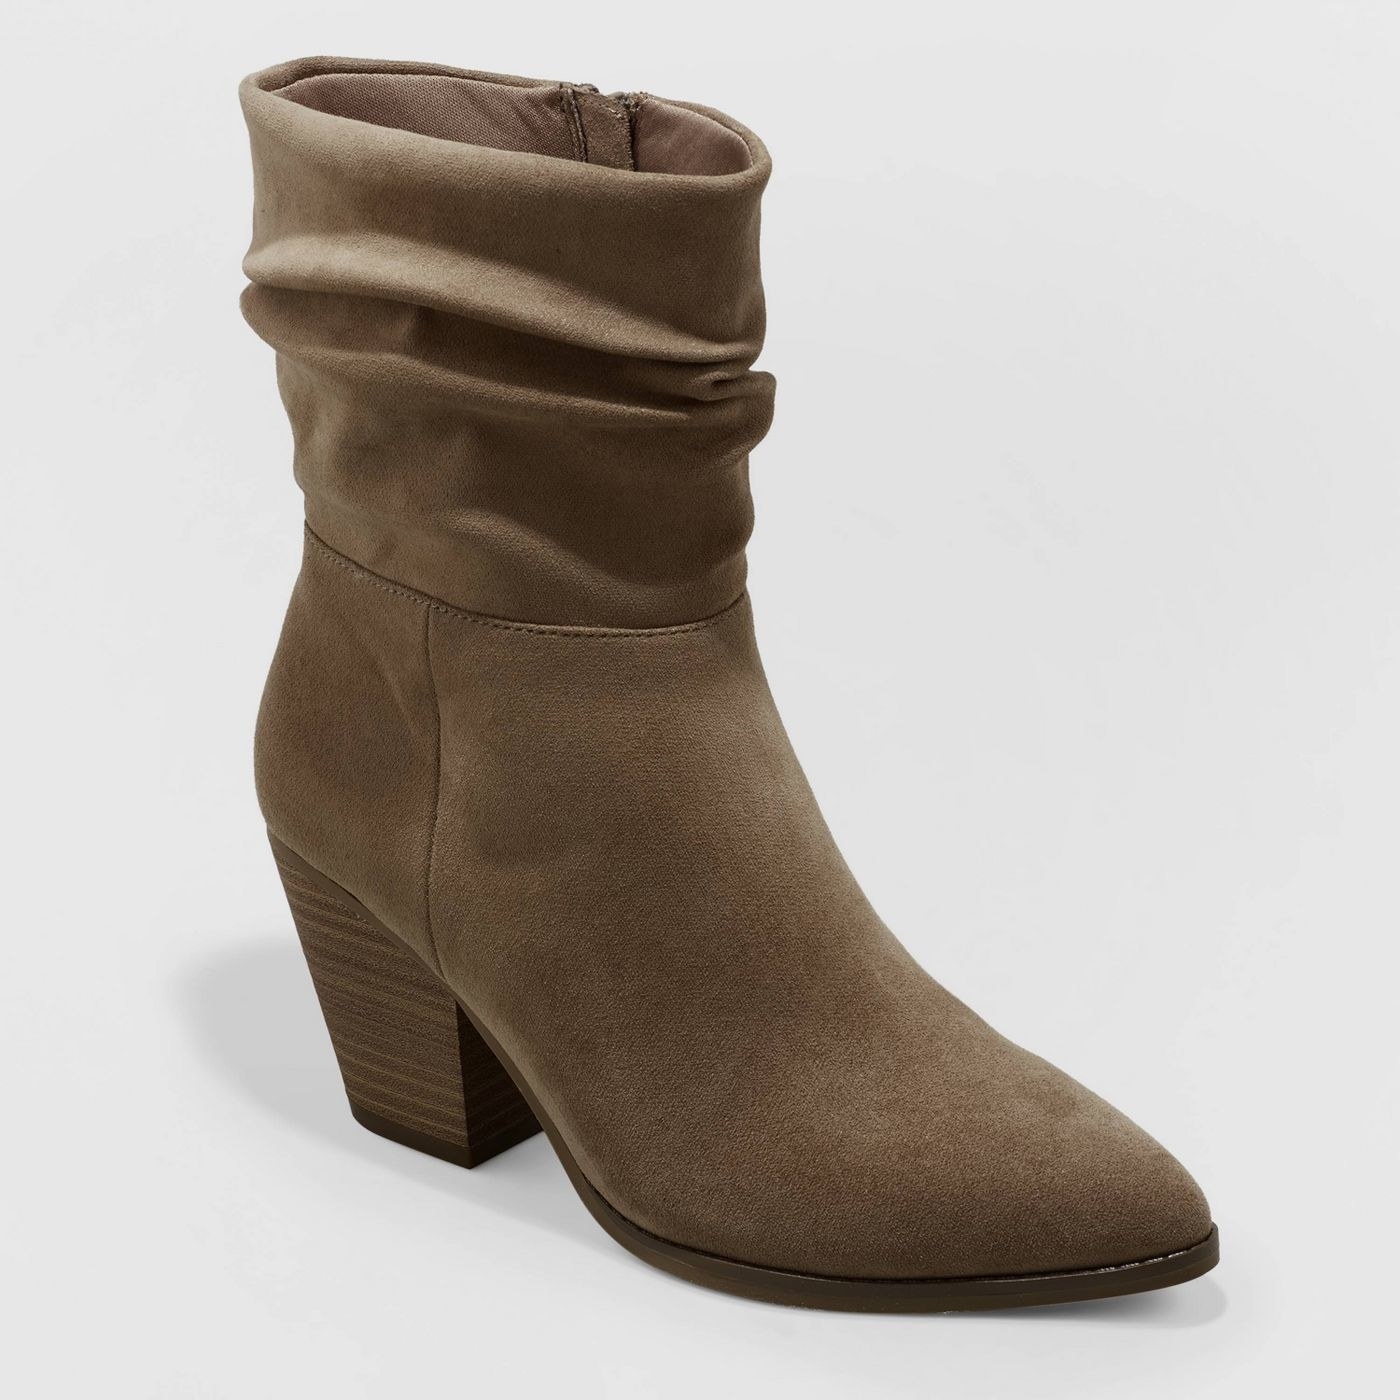 taupe colored low slouchy boot